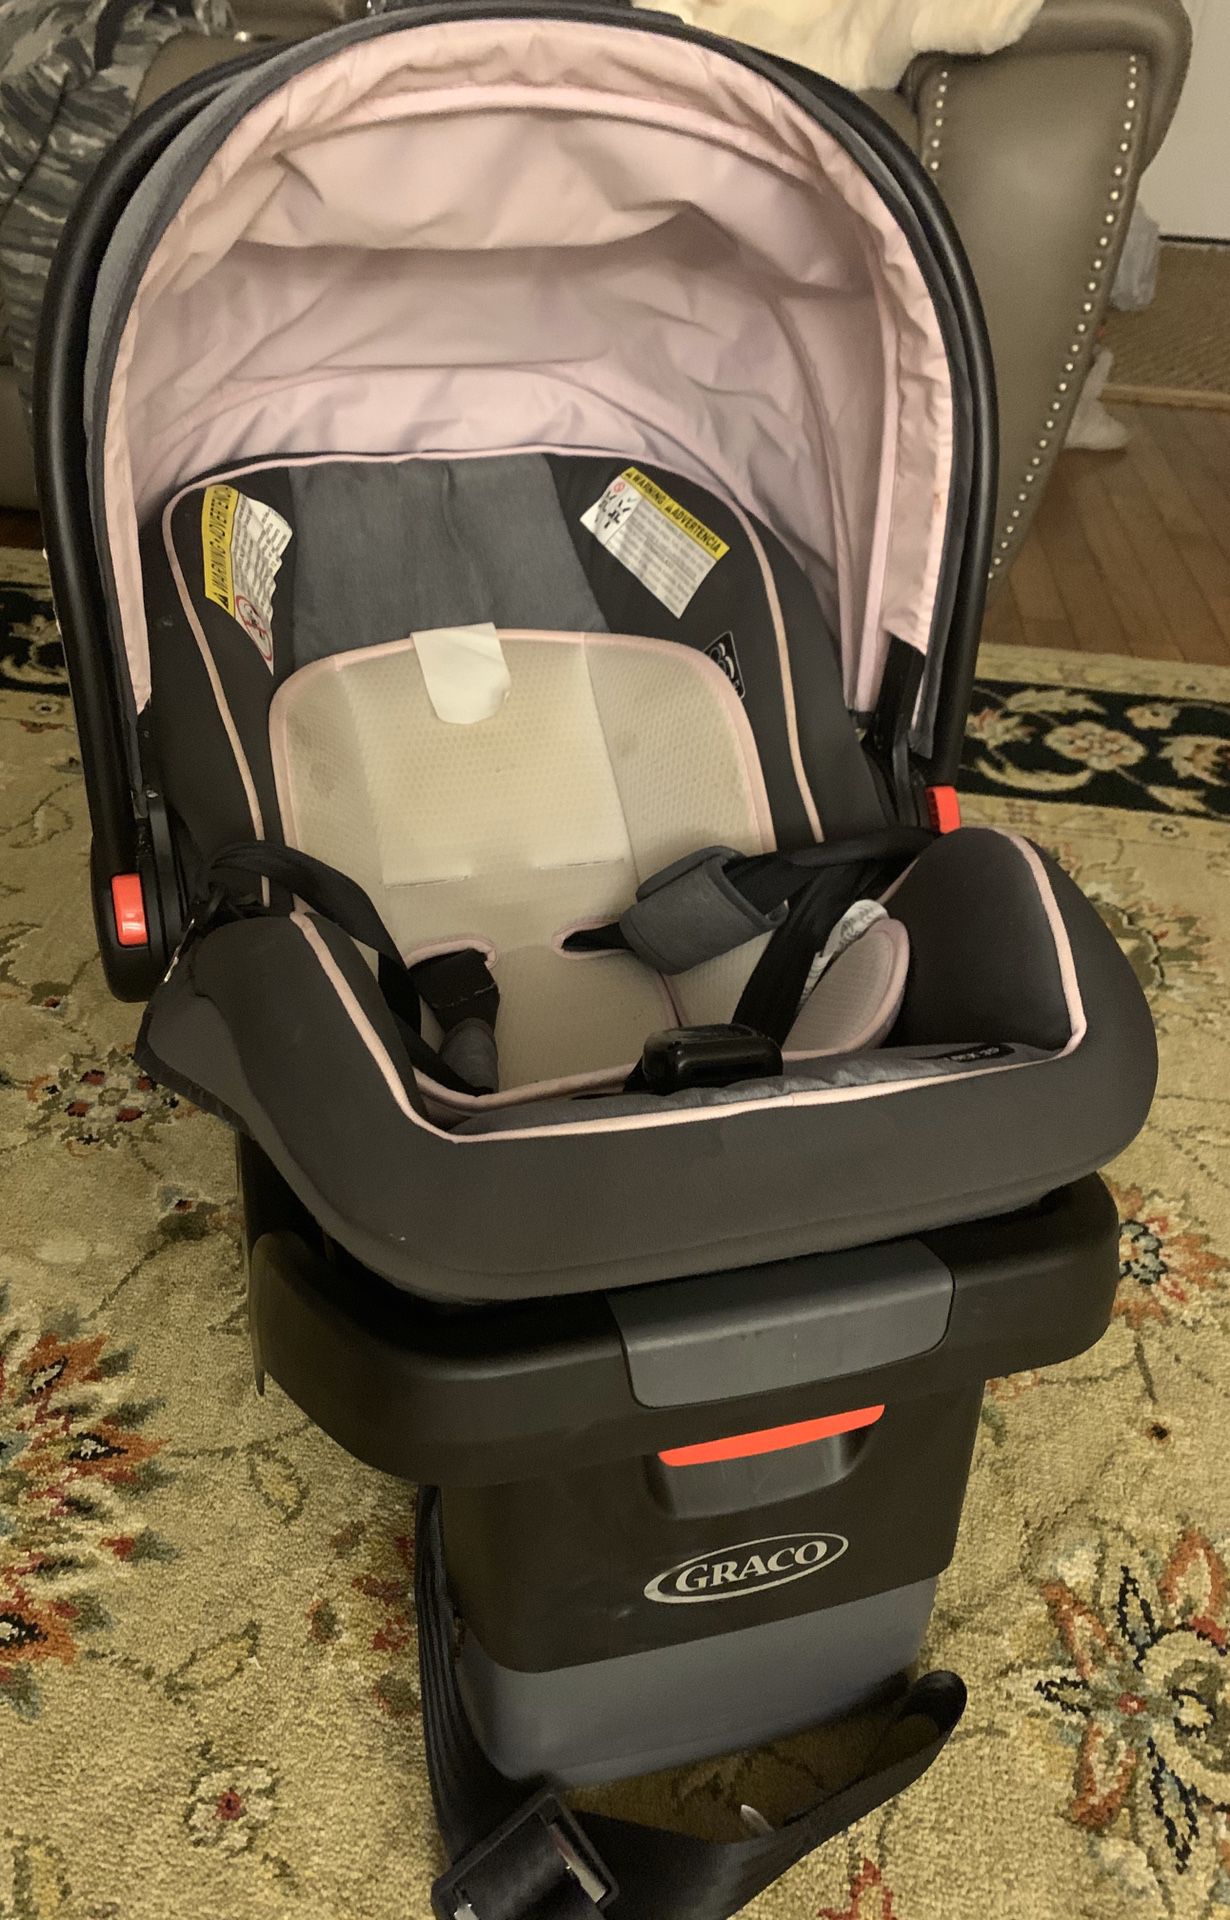 Stroller and Car seat